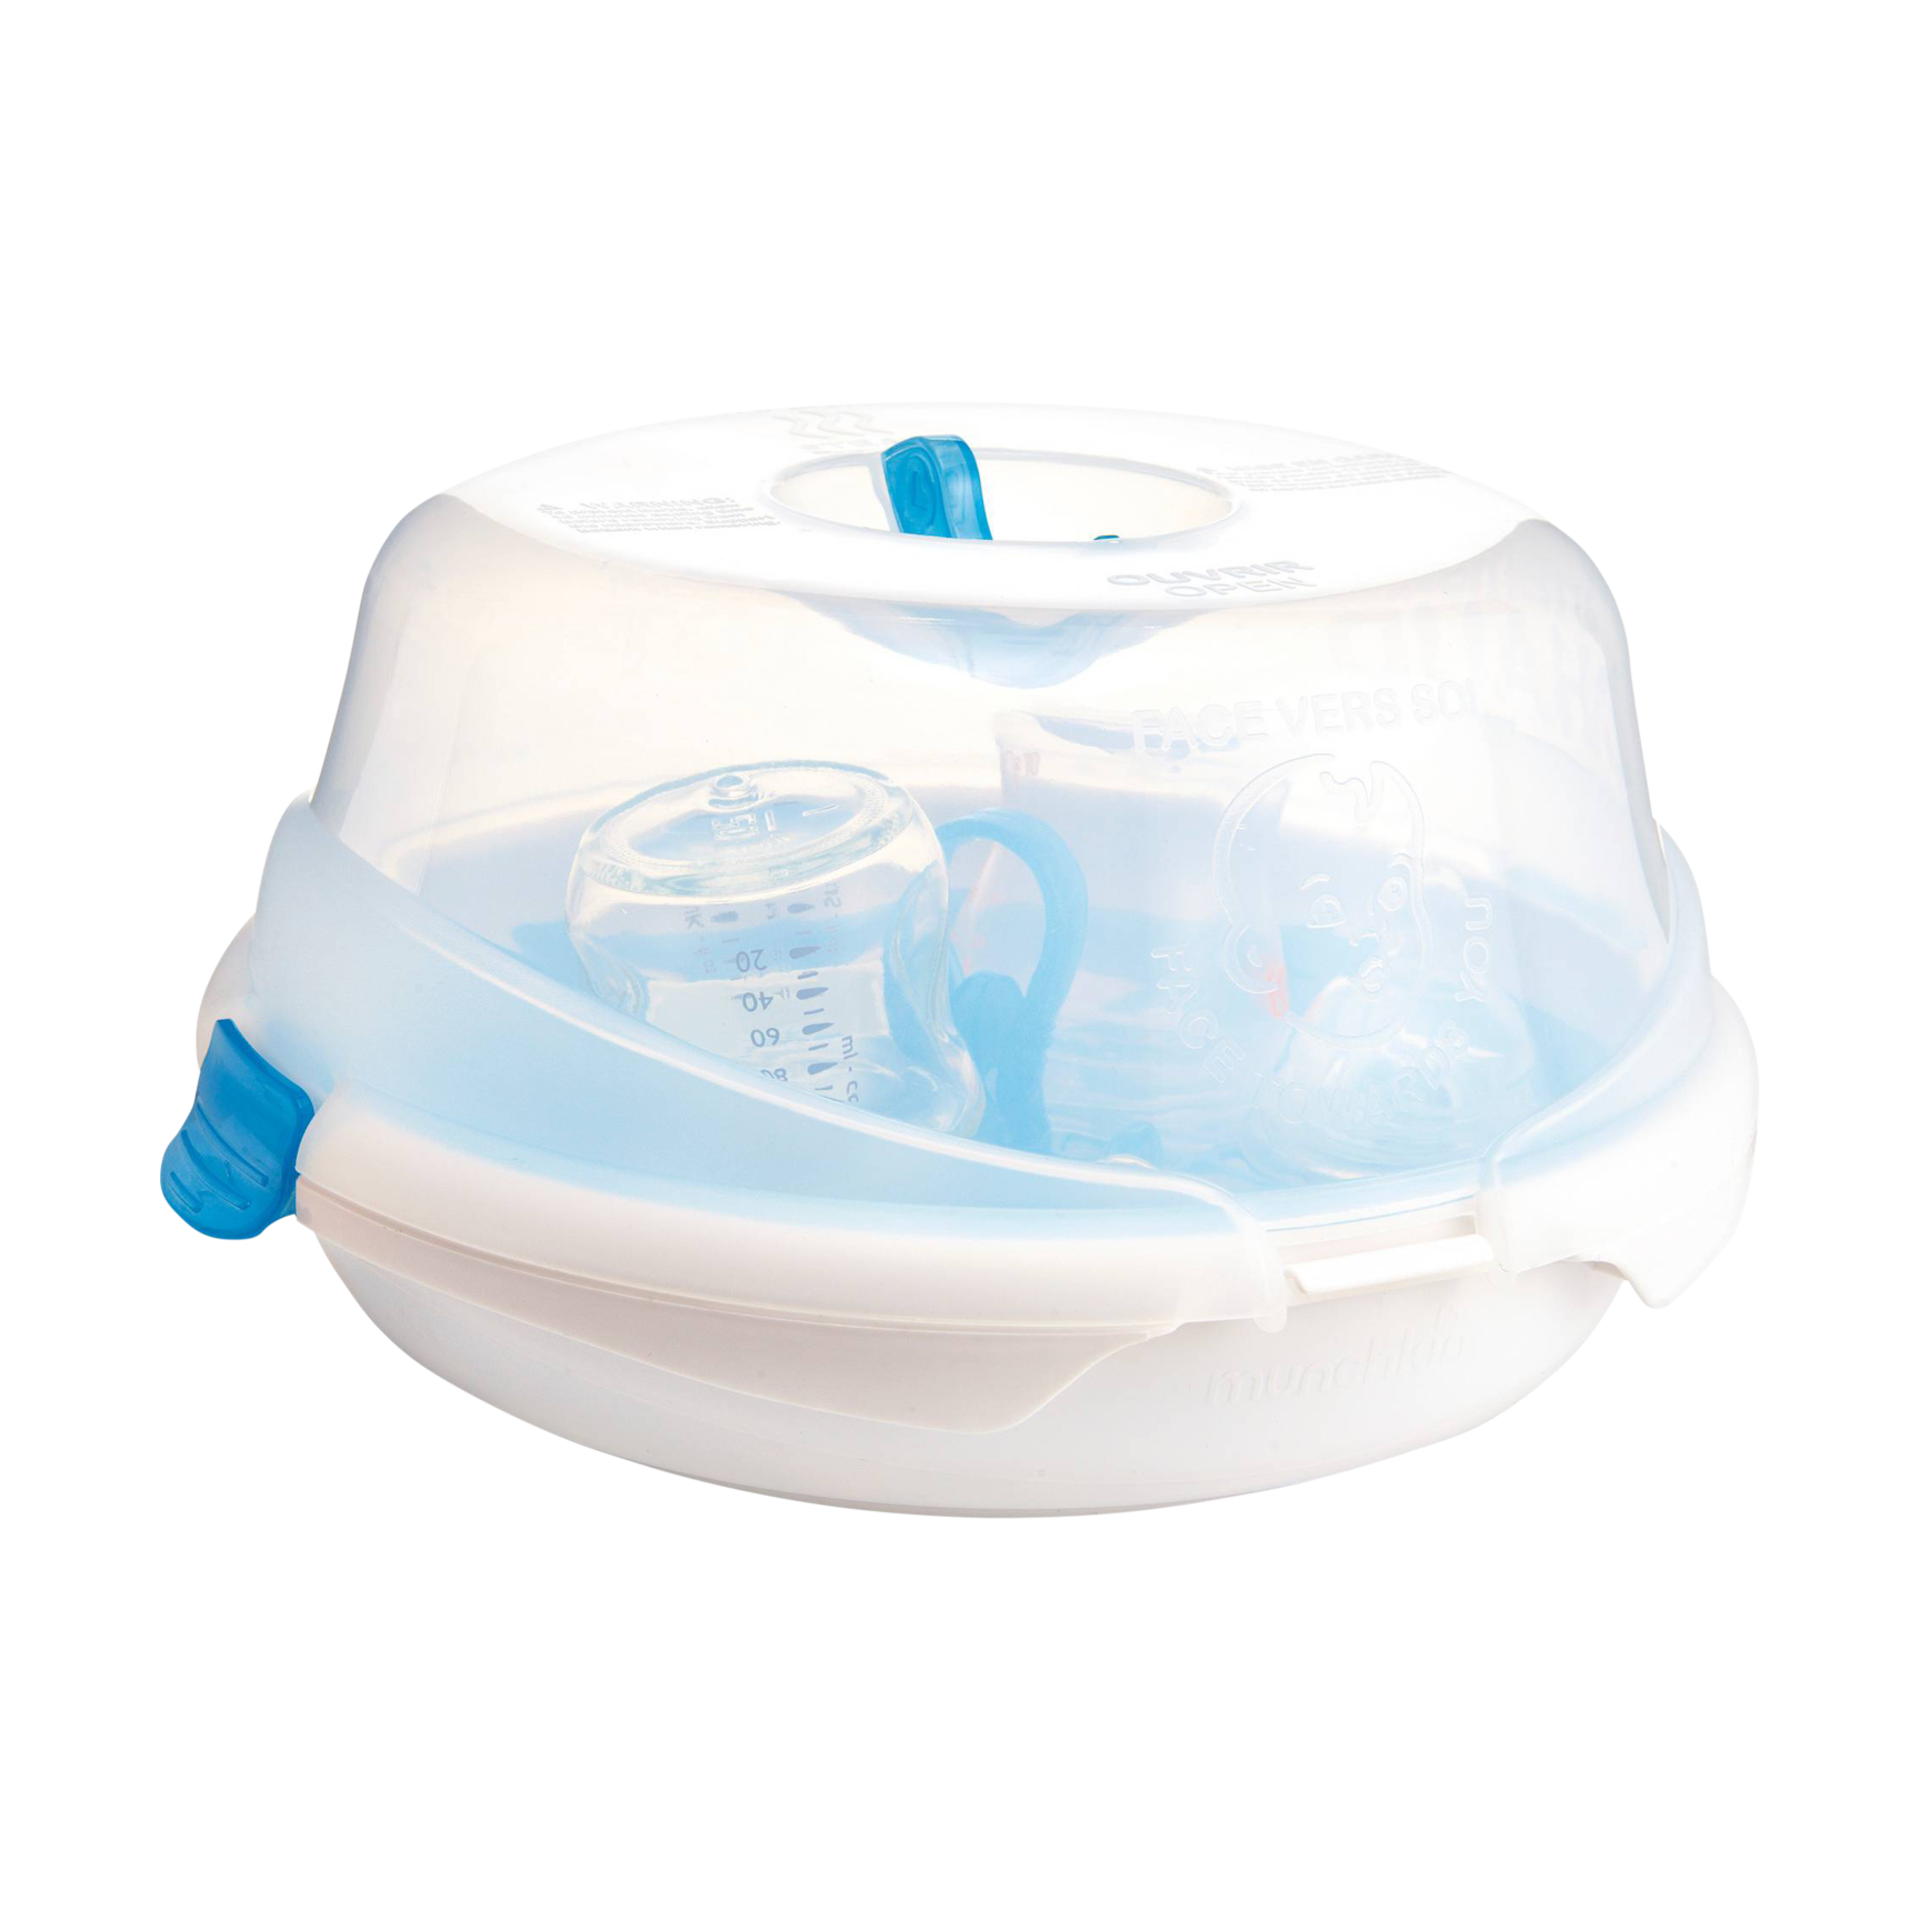 top rated bottle sterilizer